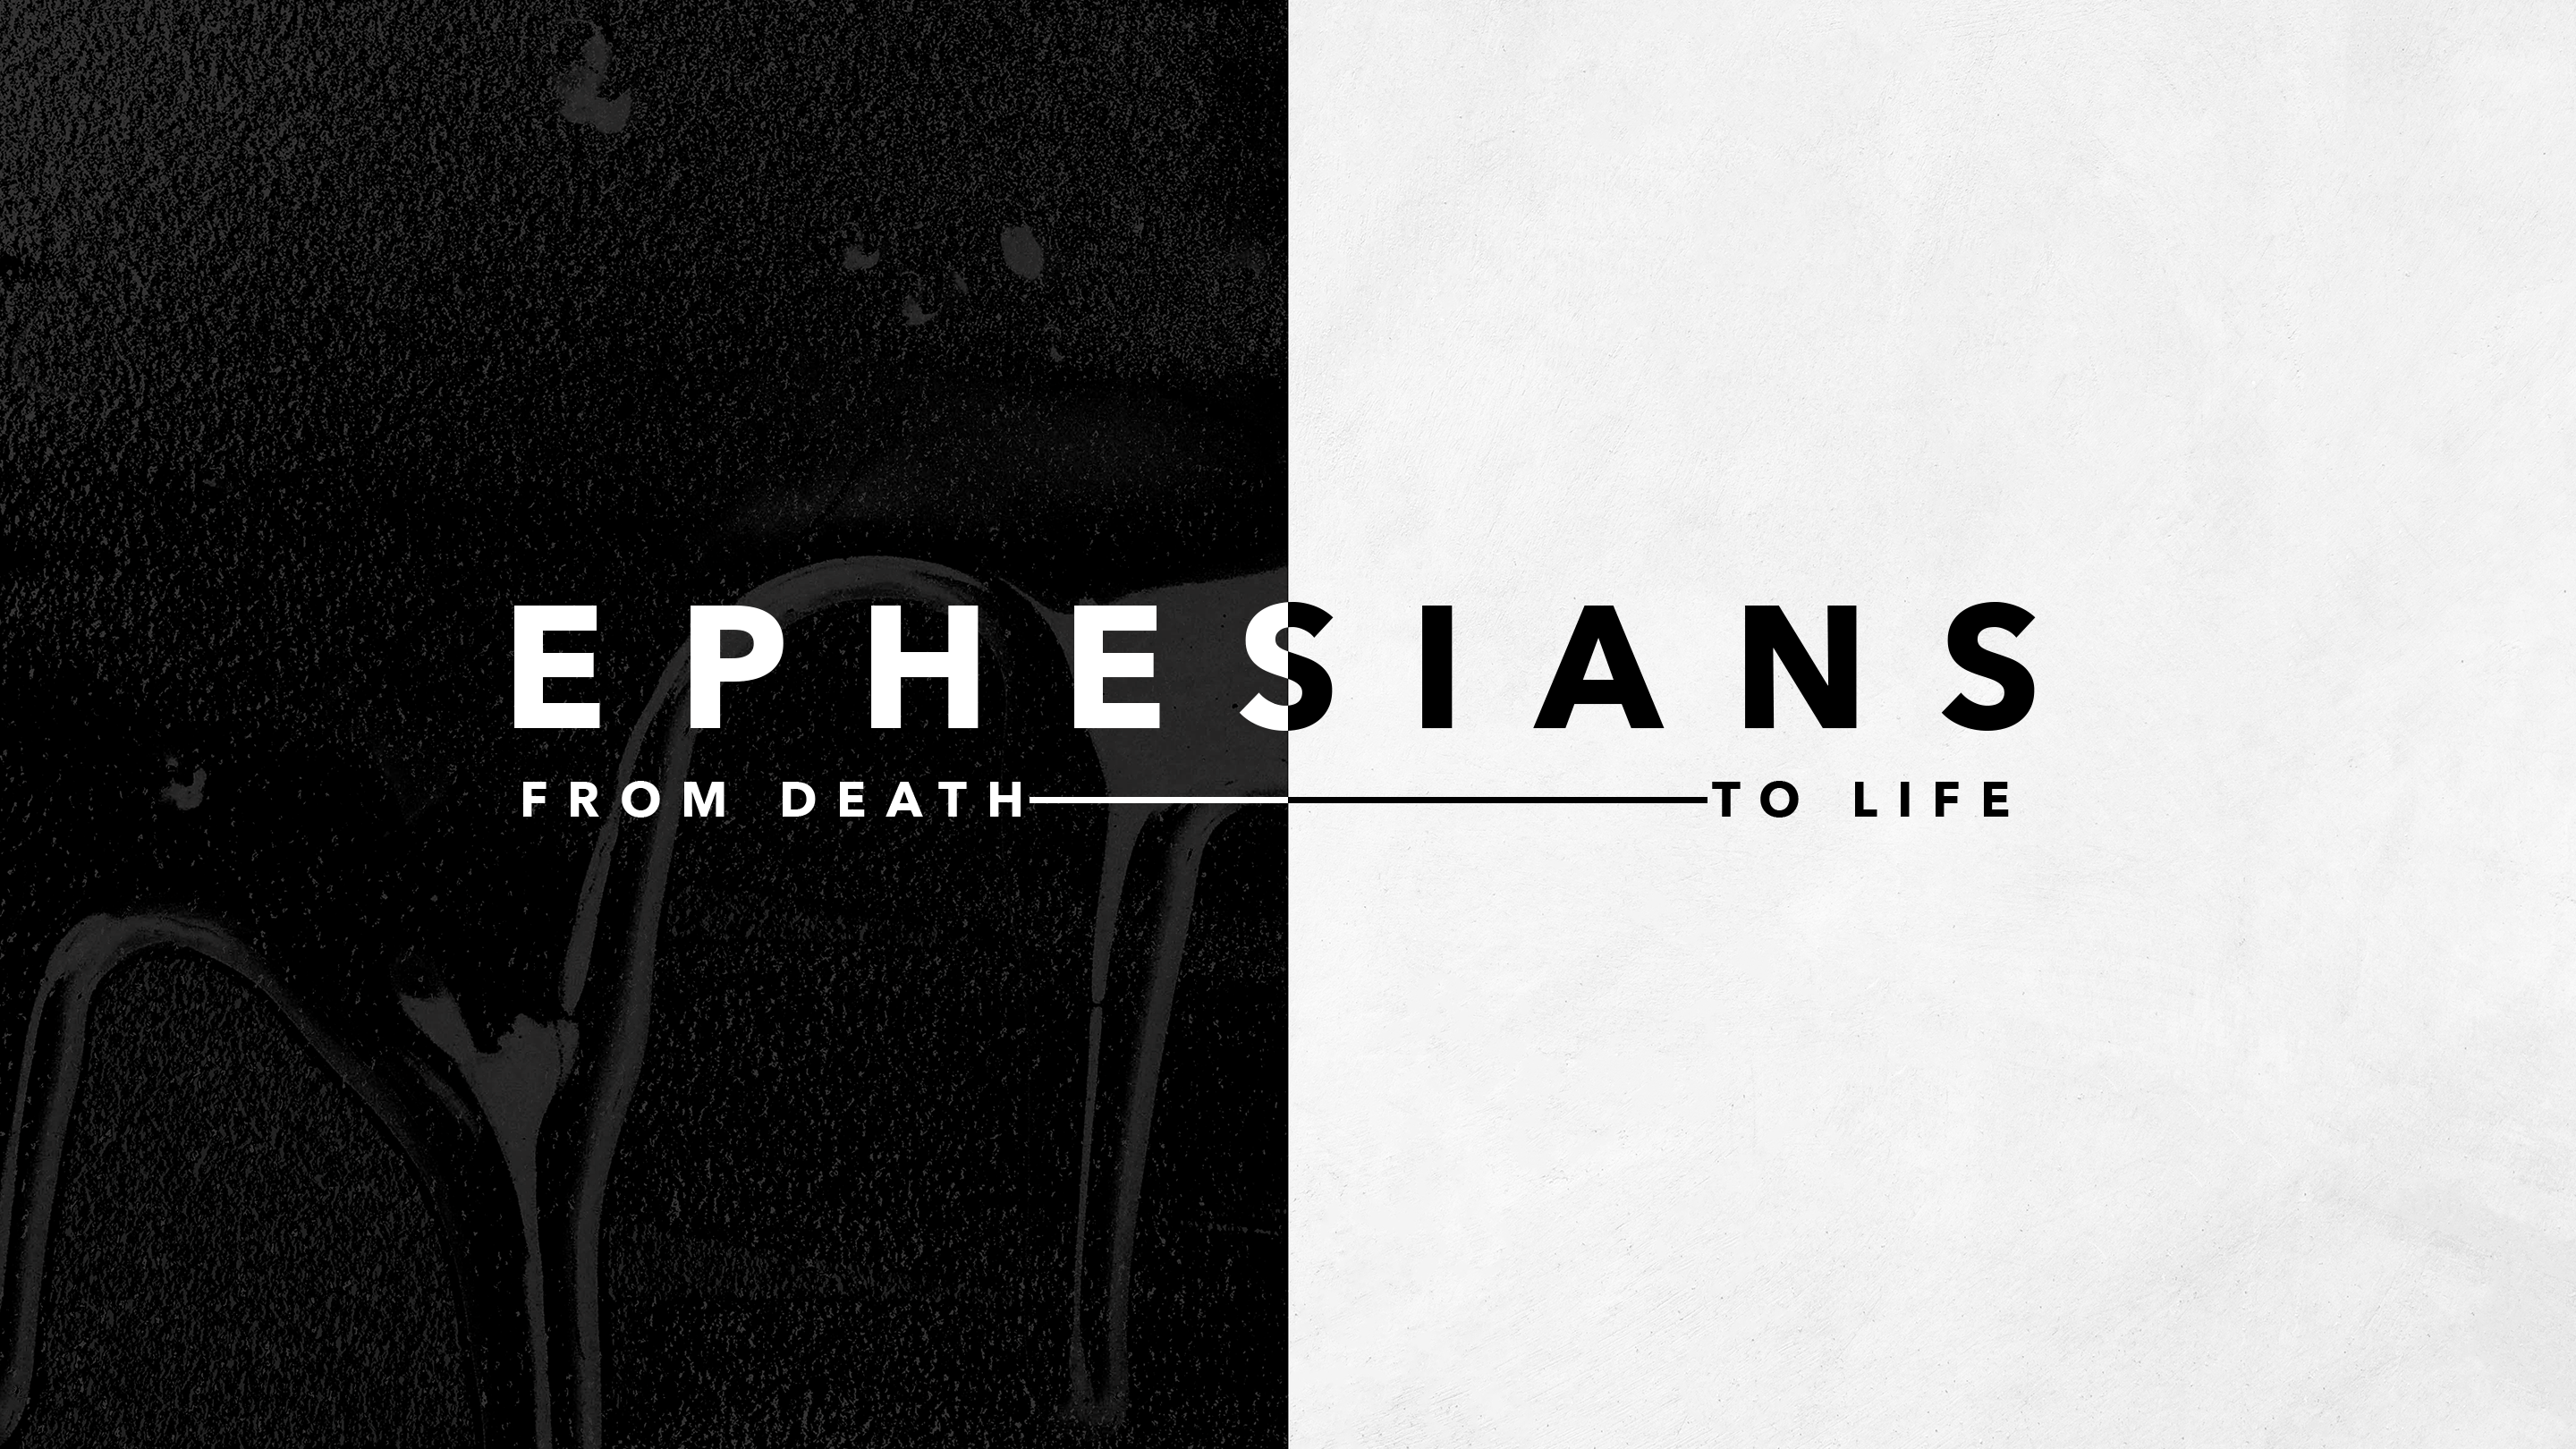 From Death to Life: The Mystery of Grace (Ephesians 3:1-10)